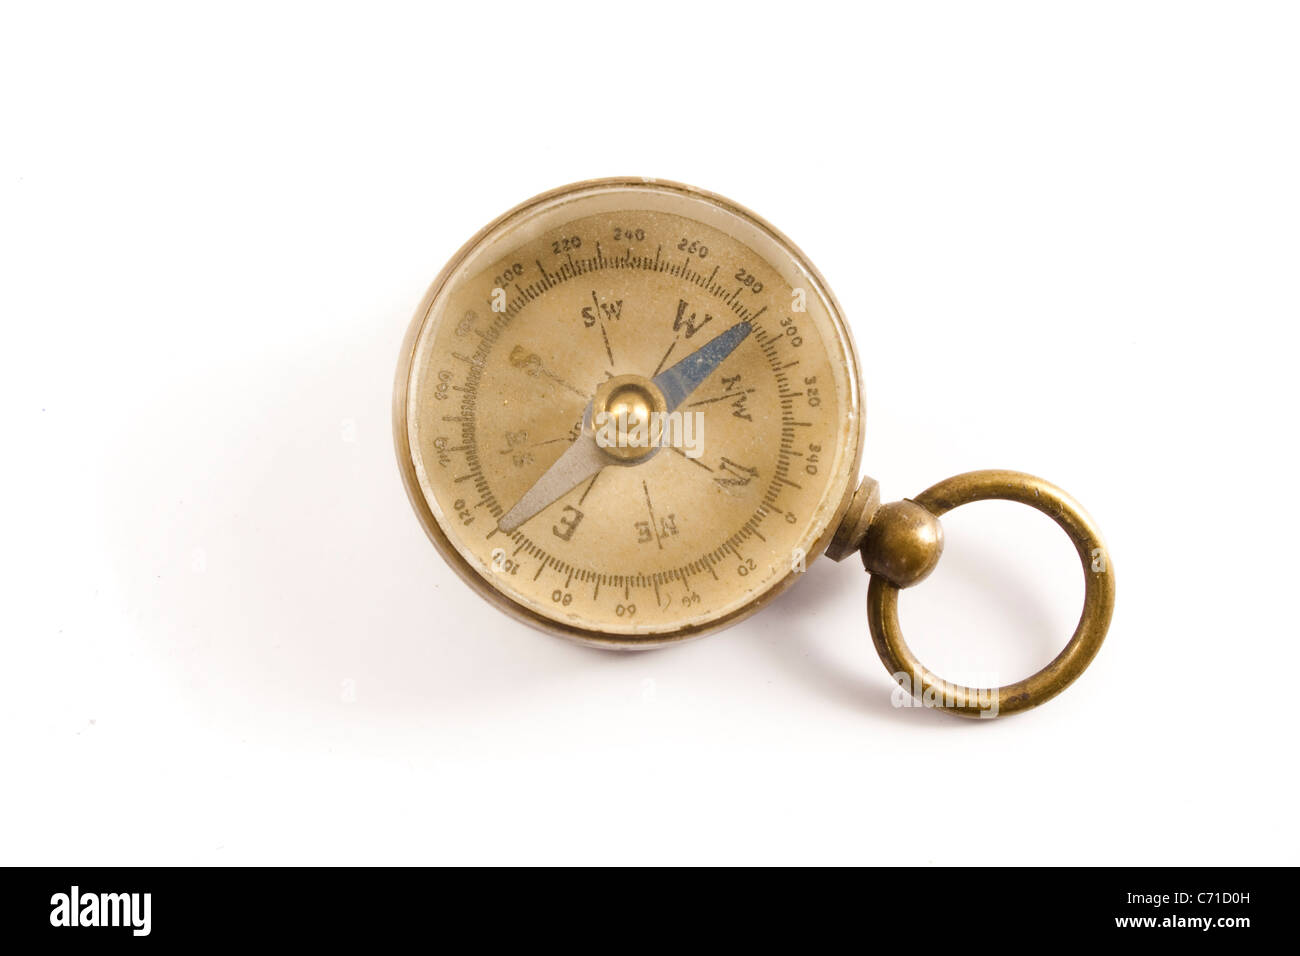 Antique Worn and Faded Old Brass Compass Isolated on White Background Stock Photo